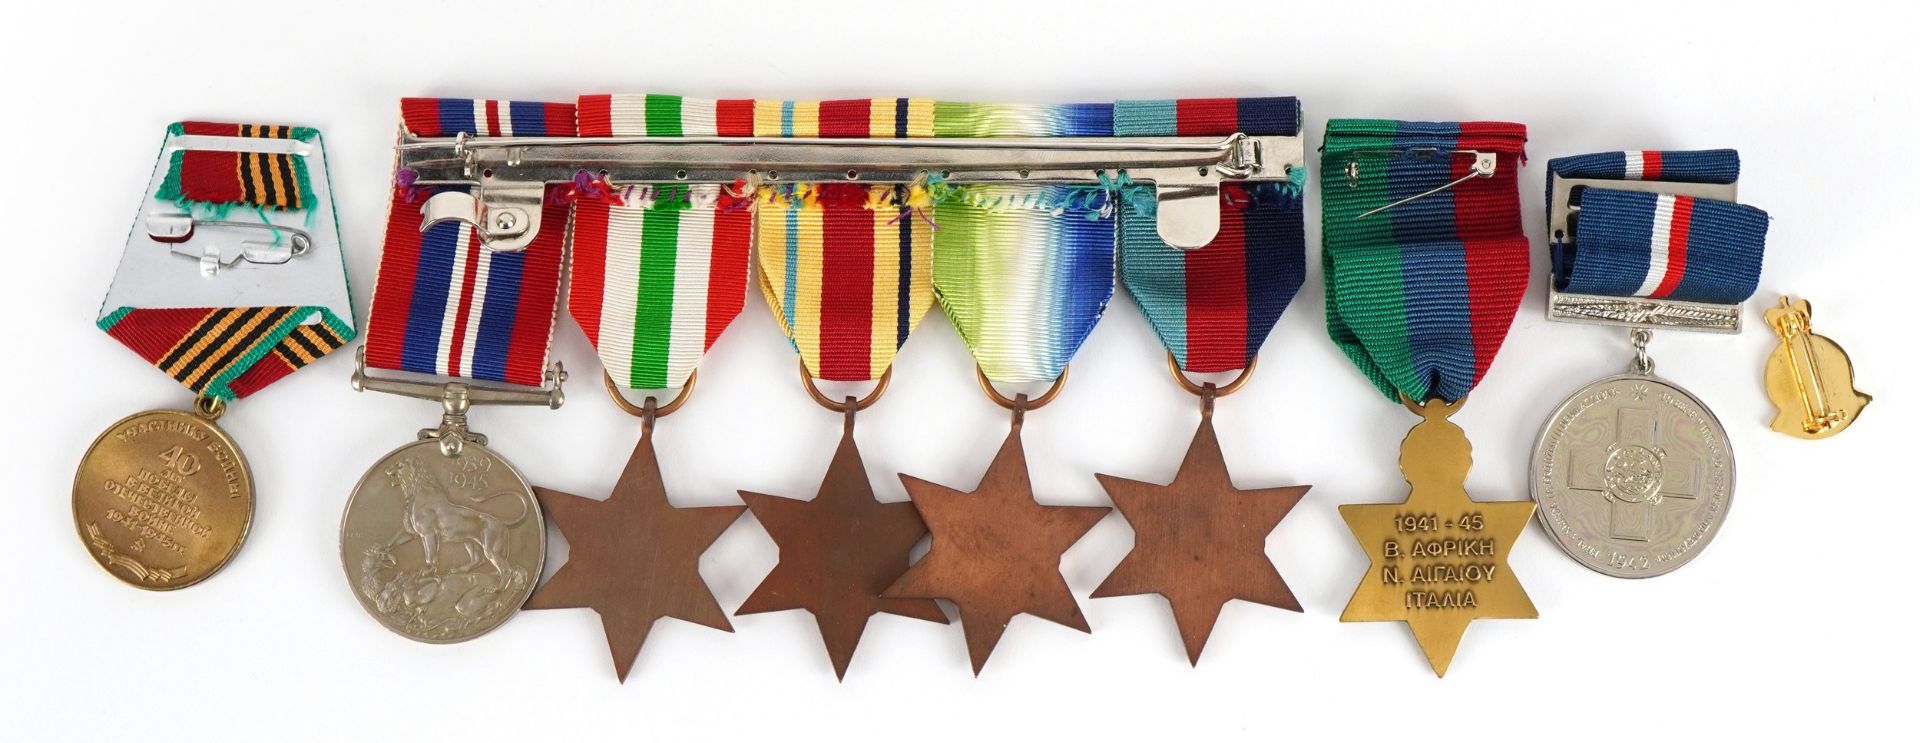 British military World War II medal group including four stars and an armed forces veteran badge - Image 3 of 4